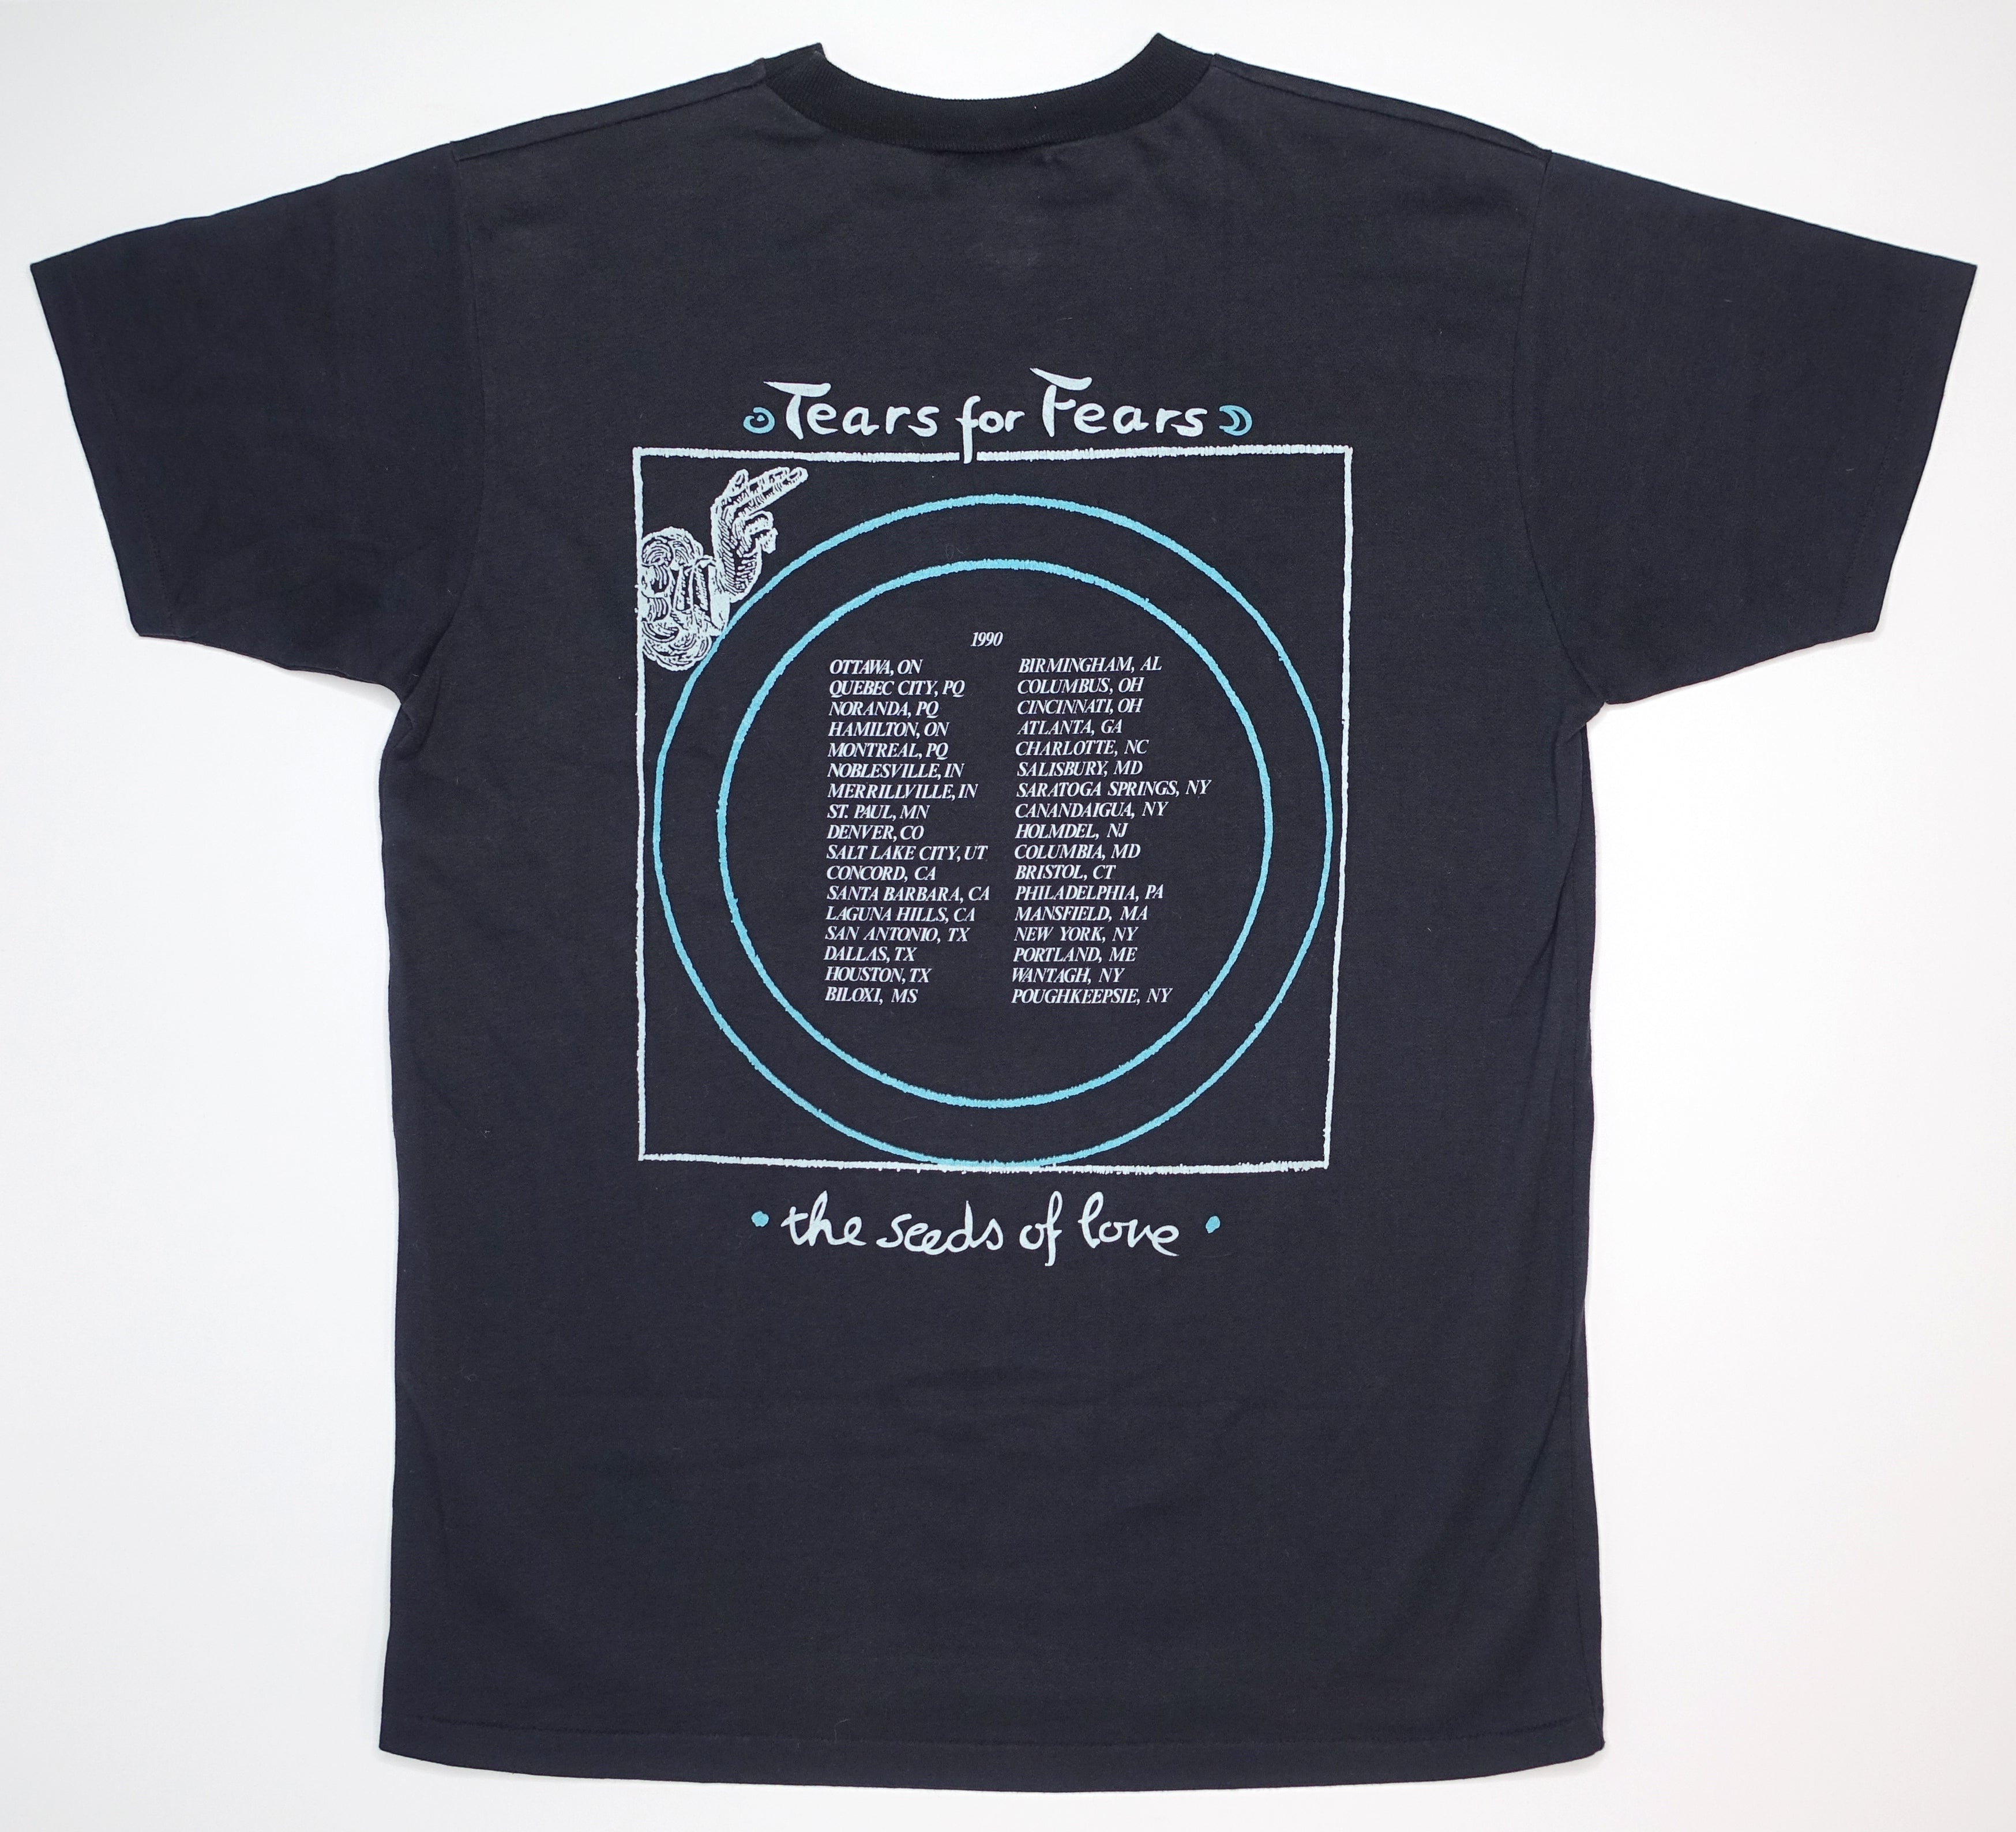 Tears For Fears – The Seeds Of Love 1990 North American Tour Shirt Size XL